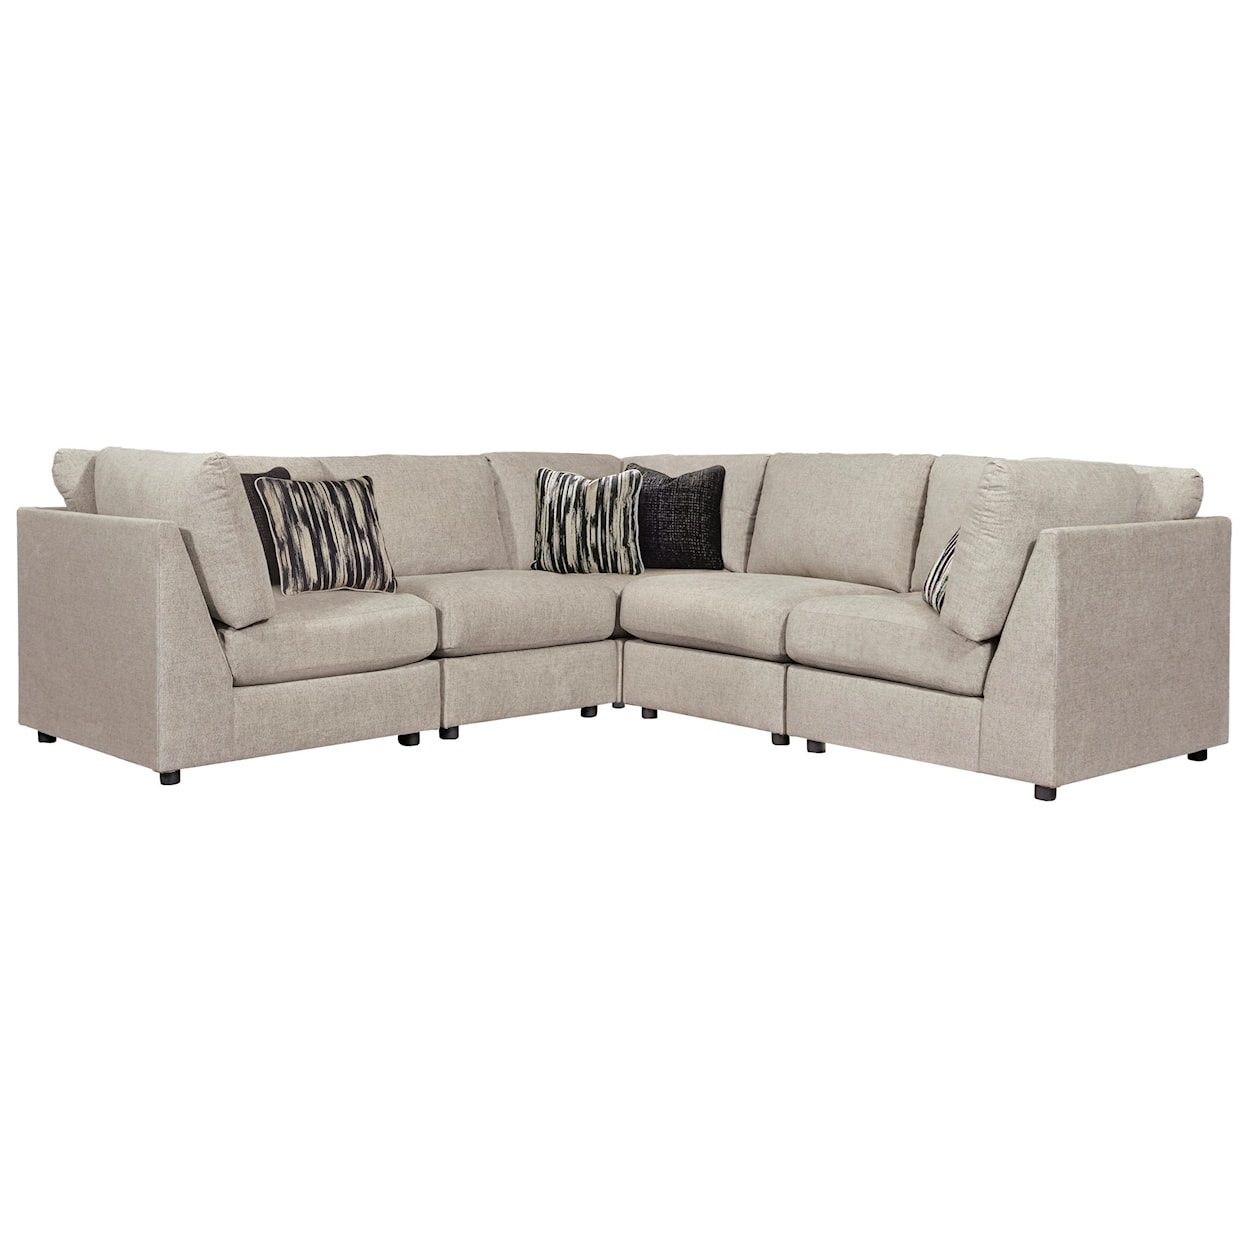 Signature Design by Ashley Furniture Kellway 5-Piece Sectional